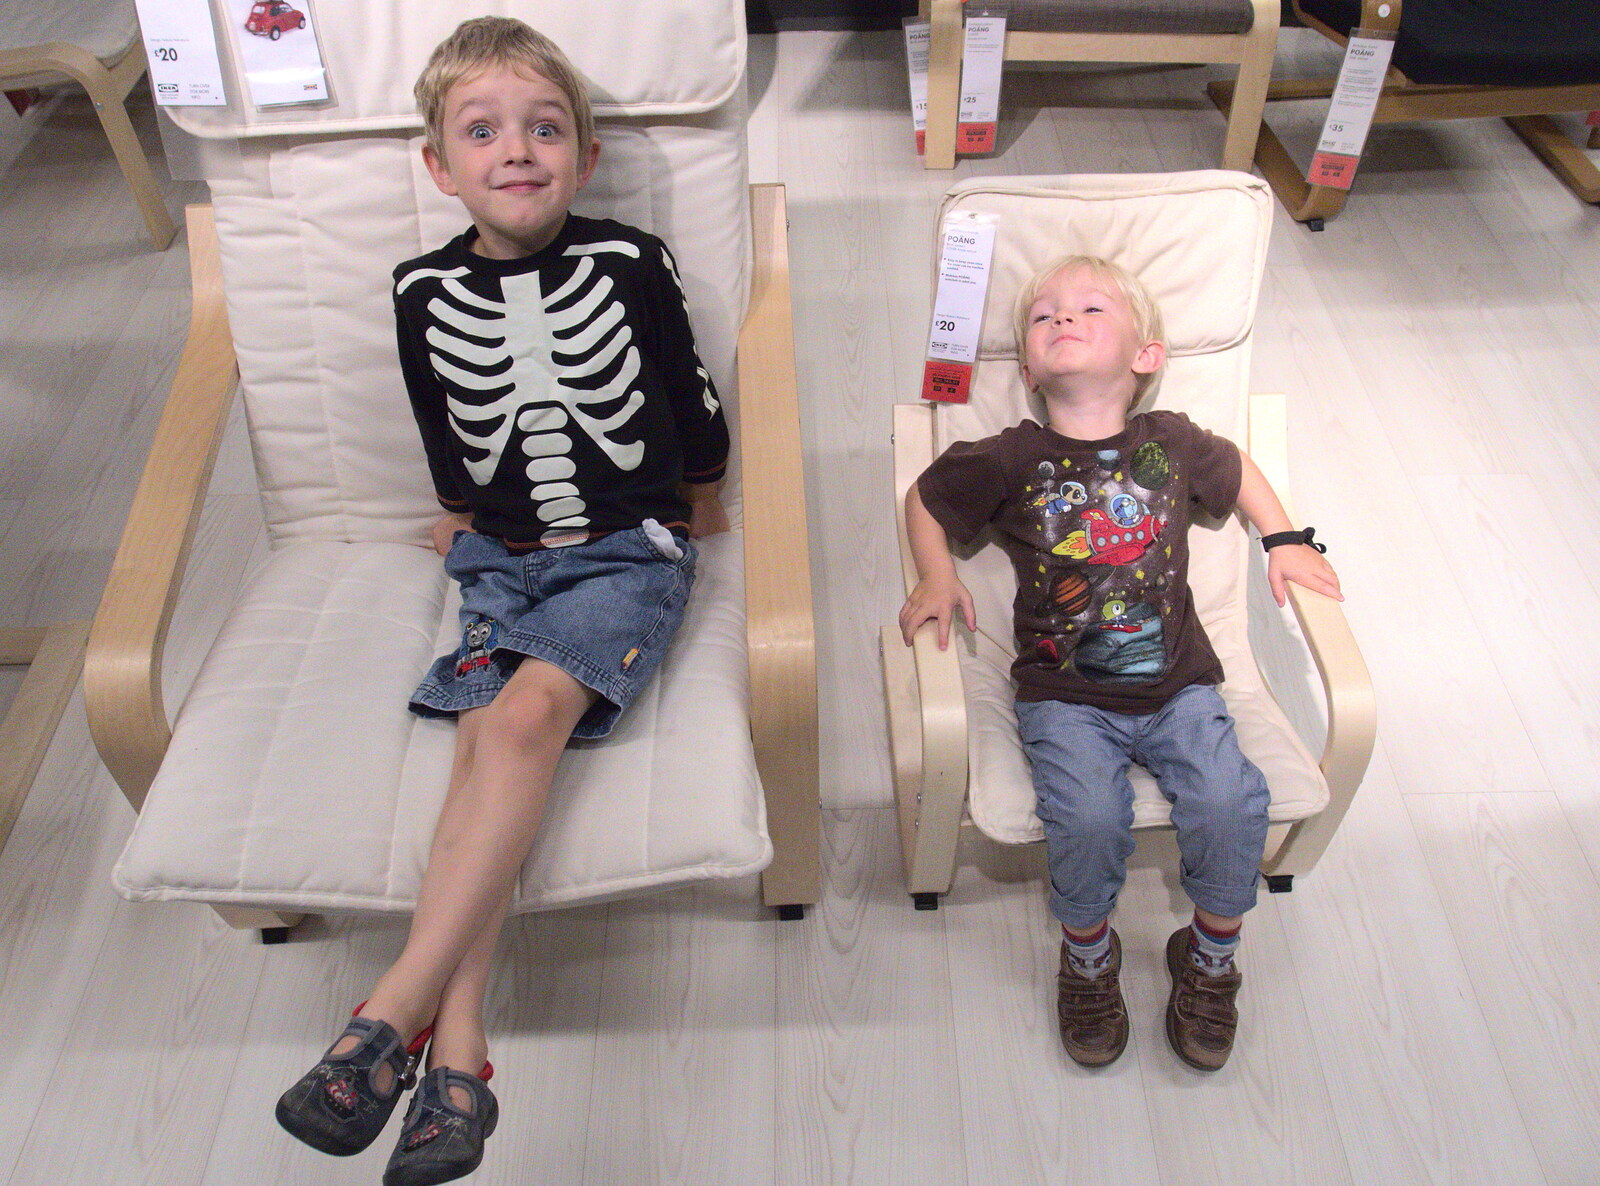 Fred and Harry take a seat from New Railway and a Trip to Ikea, Ipswich and Thurrock - 19th September 2014